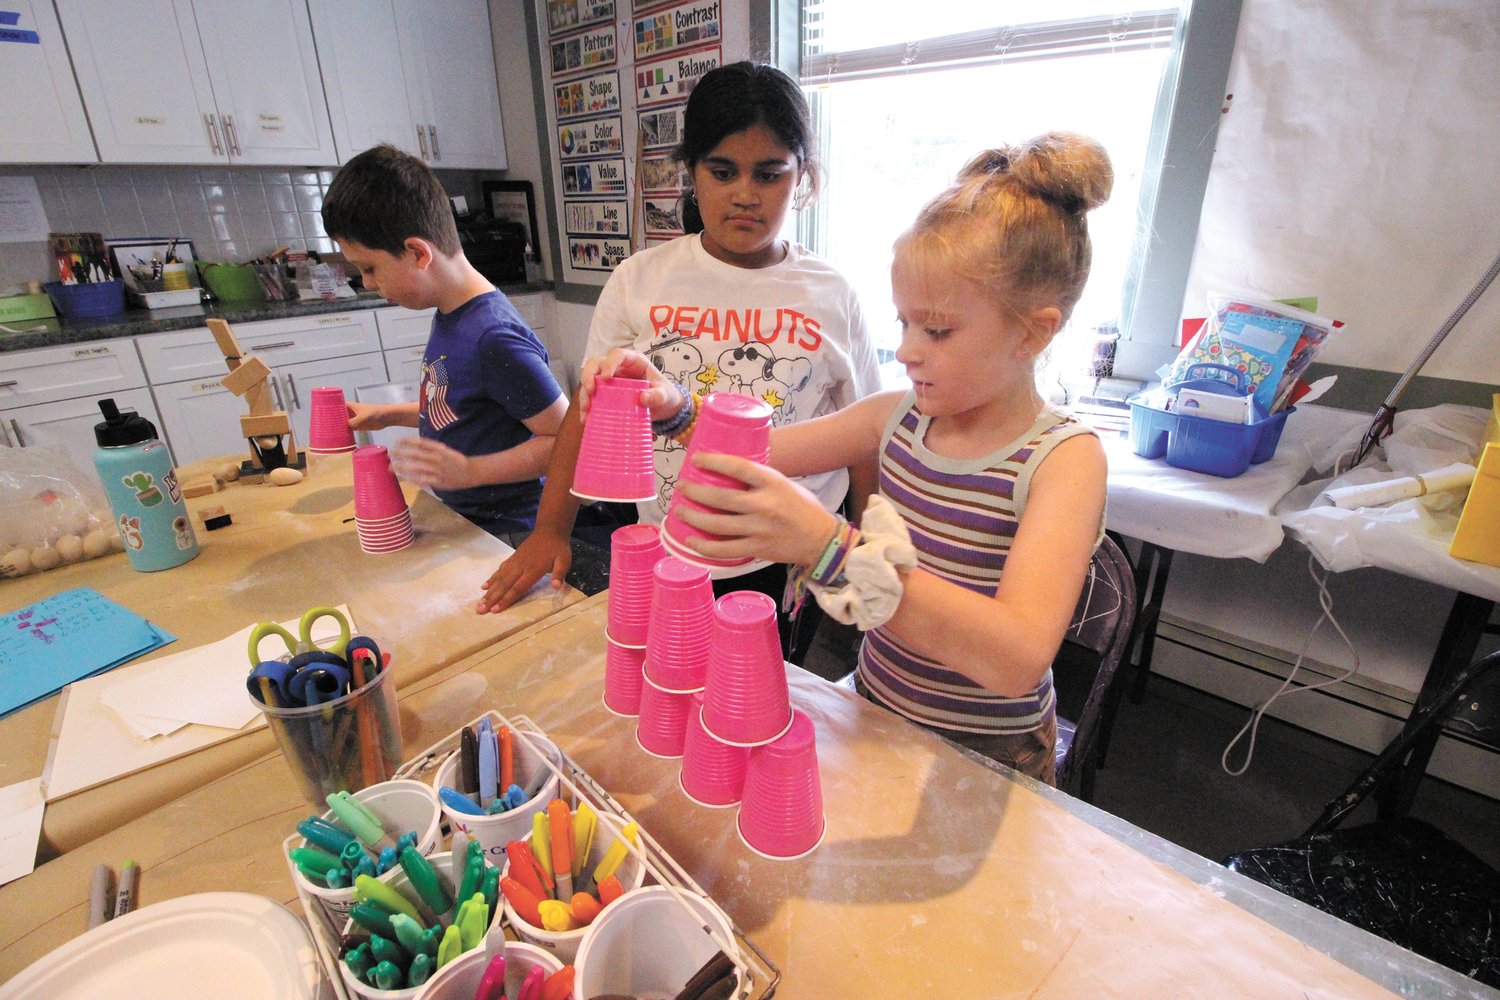 A MATTER OF AGILITY: Emmett Revens with Selina Genao looking on and Madelyn Hallett play a game of stacking and then just as quickly collecting plastic cups in a break from exercise their more creative talents.